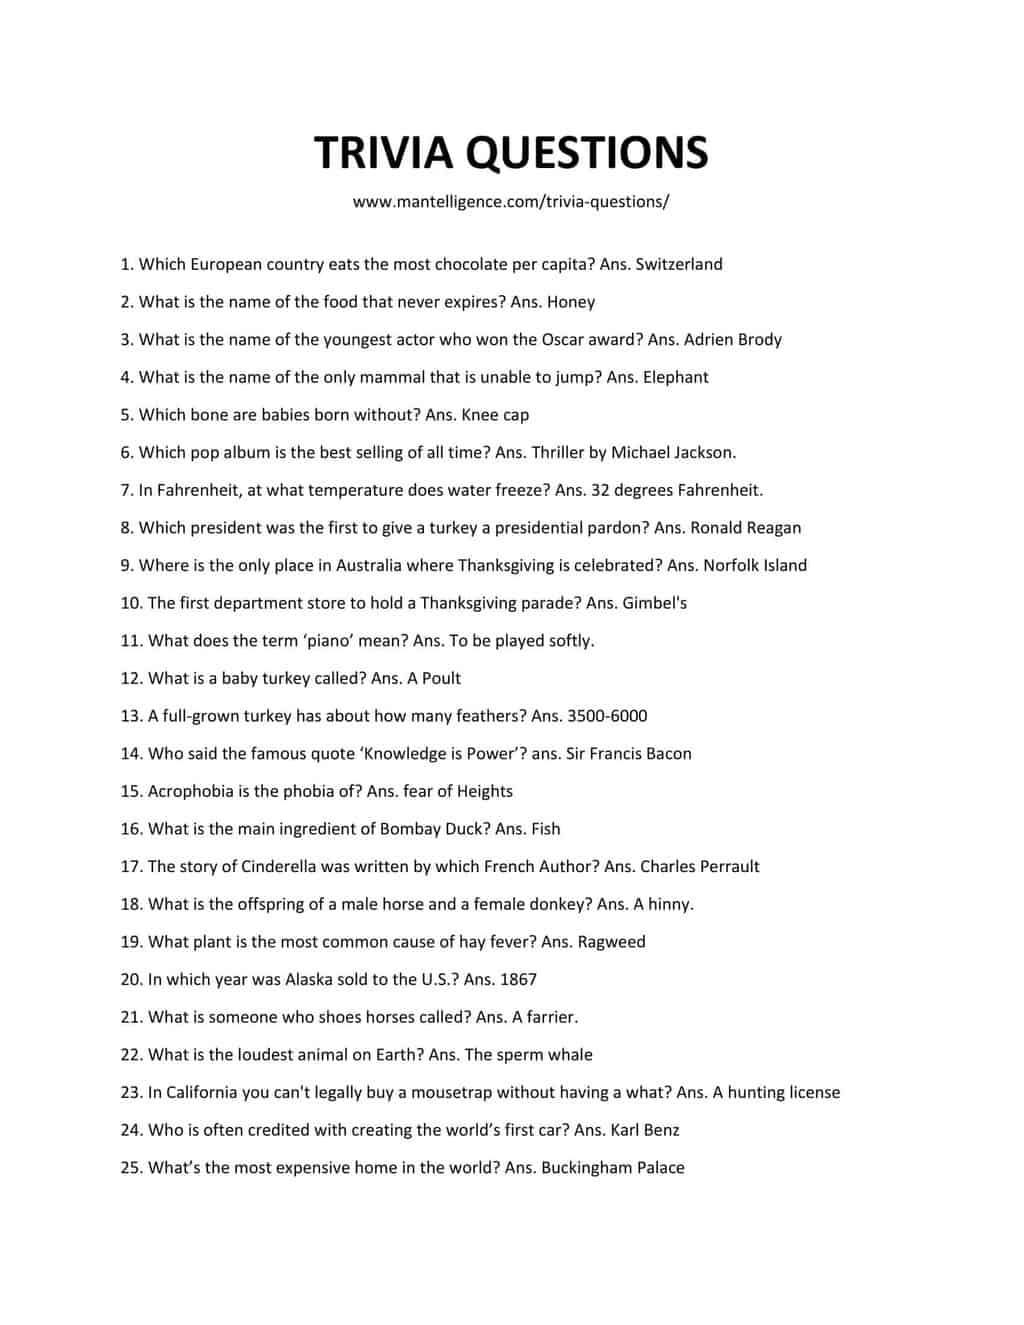 trivia-questions-for-work-trivia-questions-and-answer